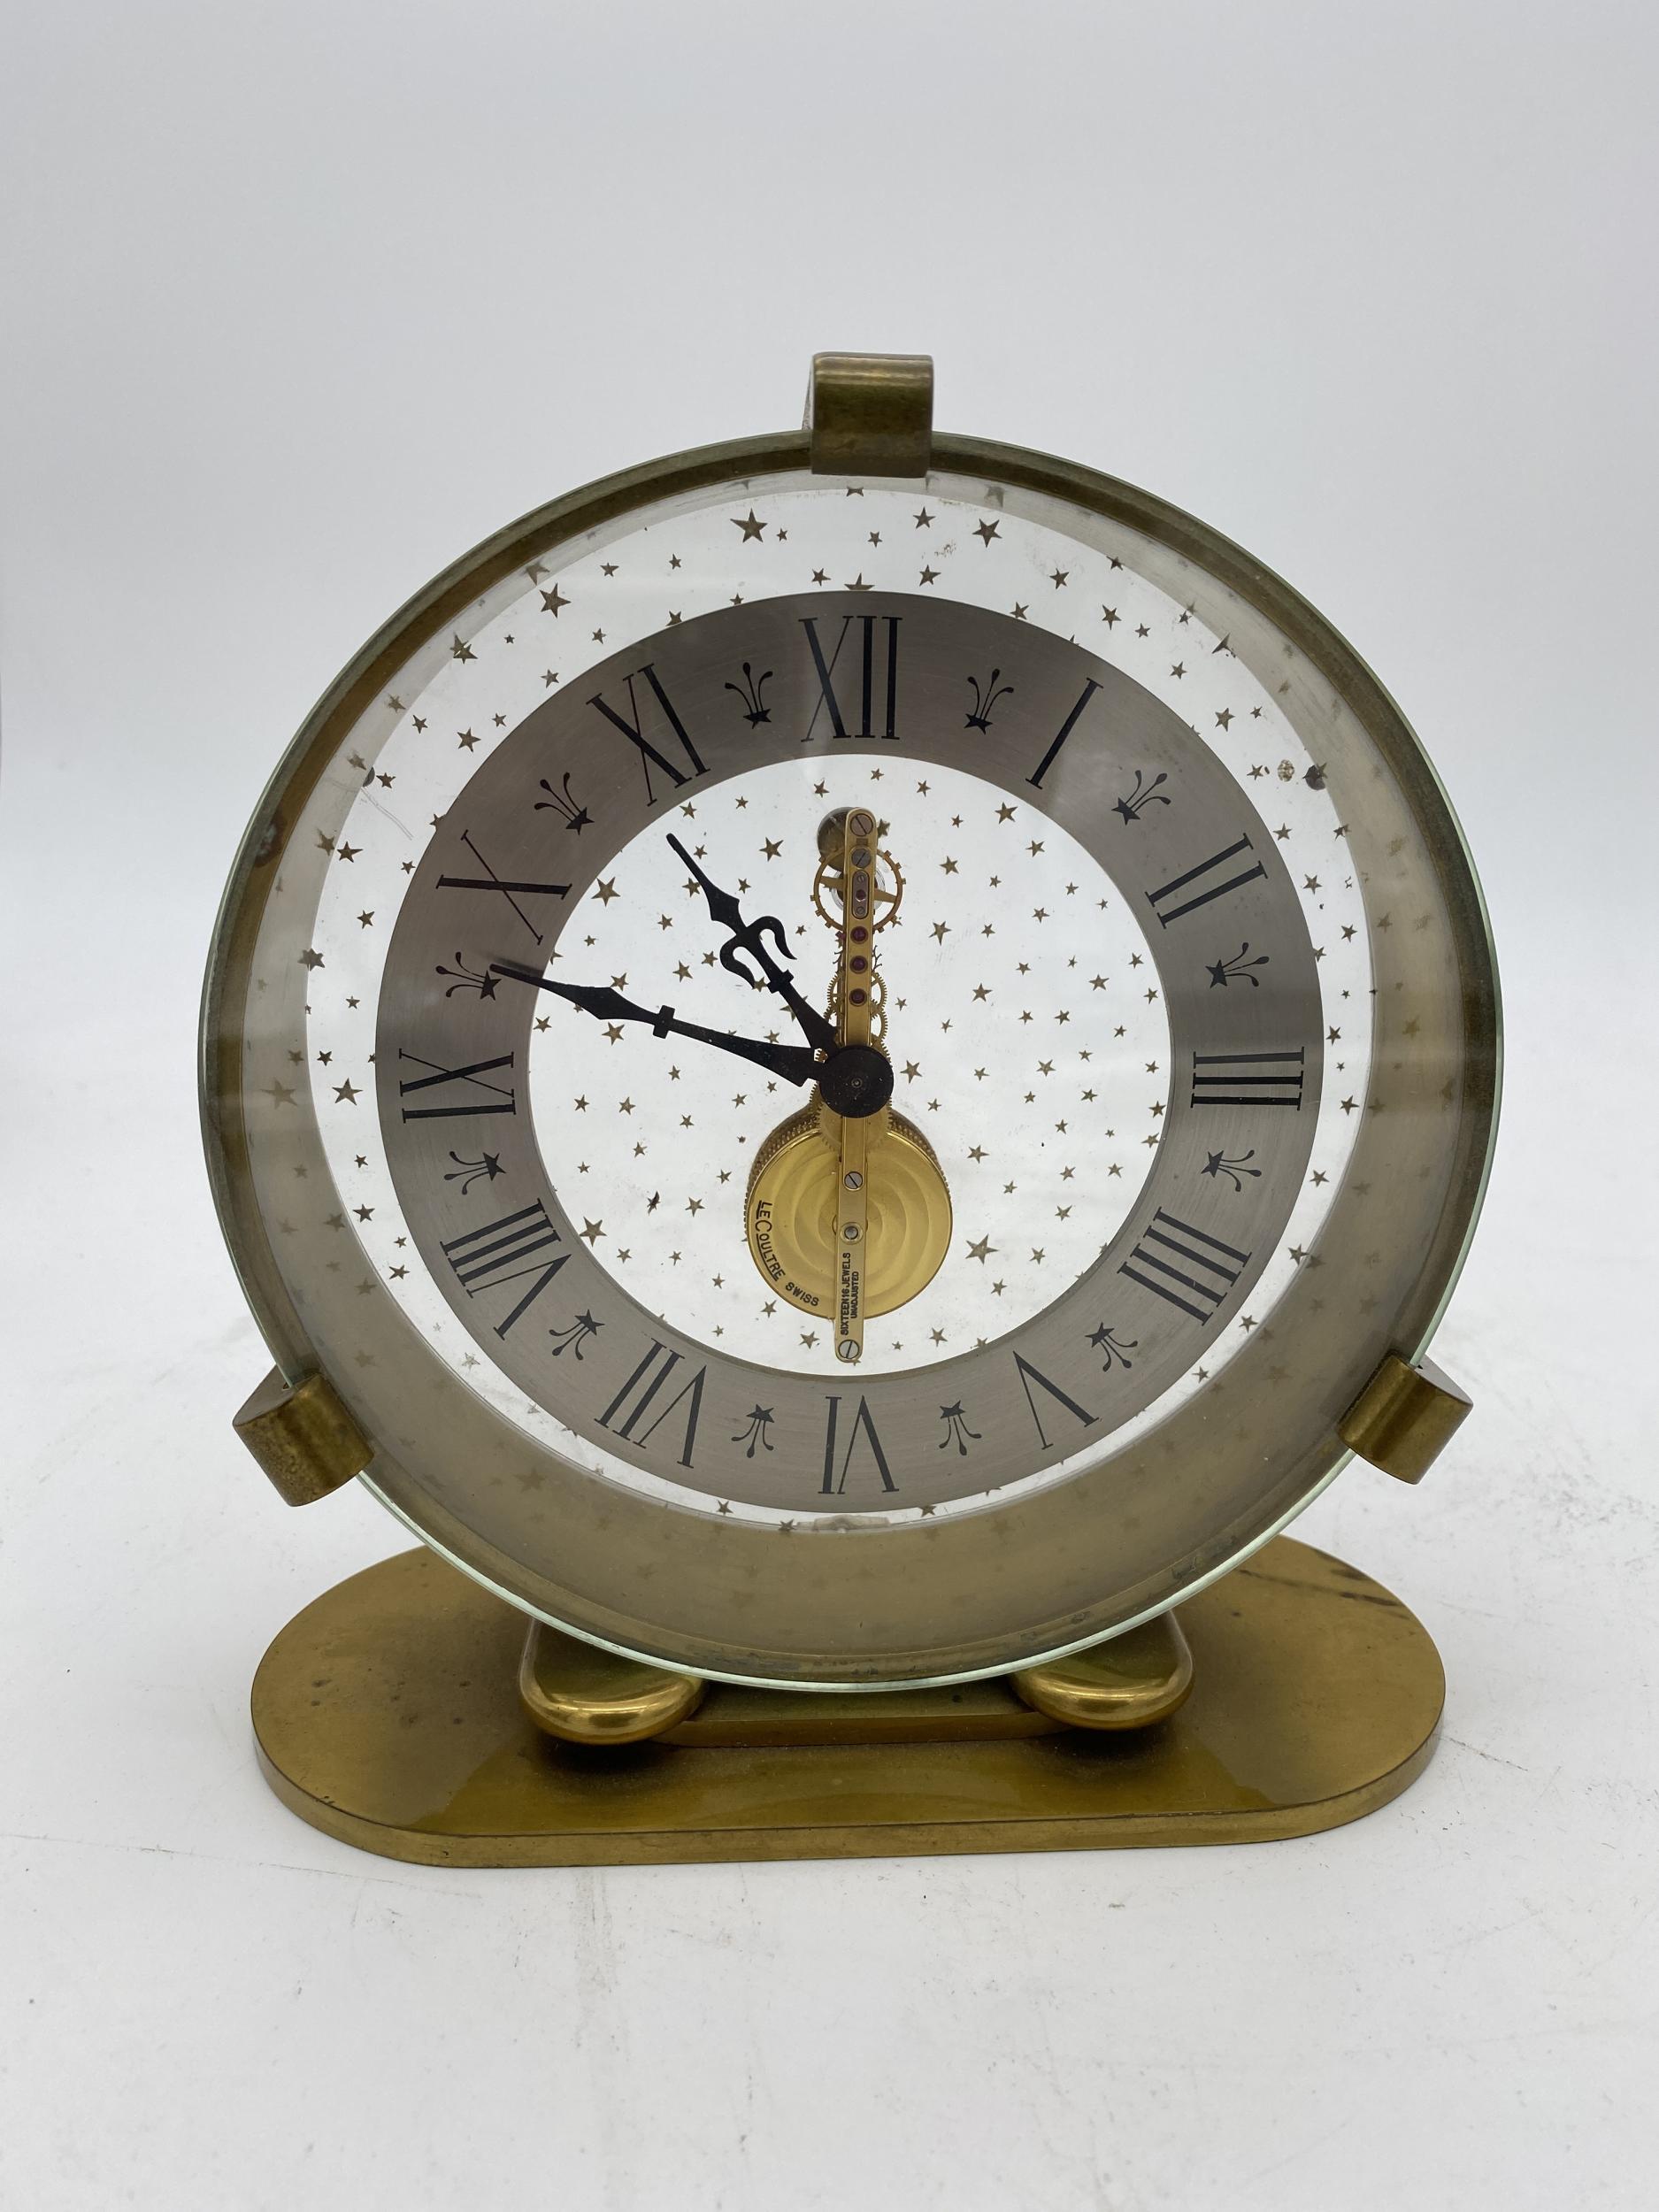 Rare Jaeger LeCoultre 8-day inline movement table desk clock. Attractive case from 1967 in gold color. The clock has two crystals, the back one with stars holds the movement, the front one protects the hands which gives the optical impression of a